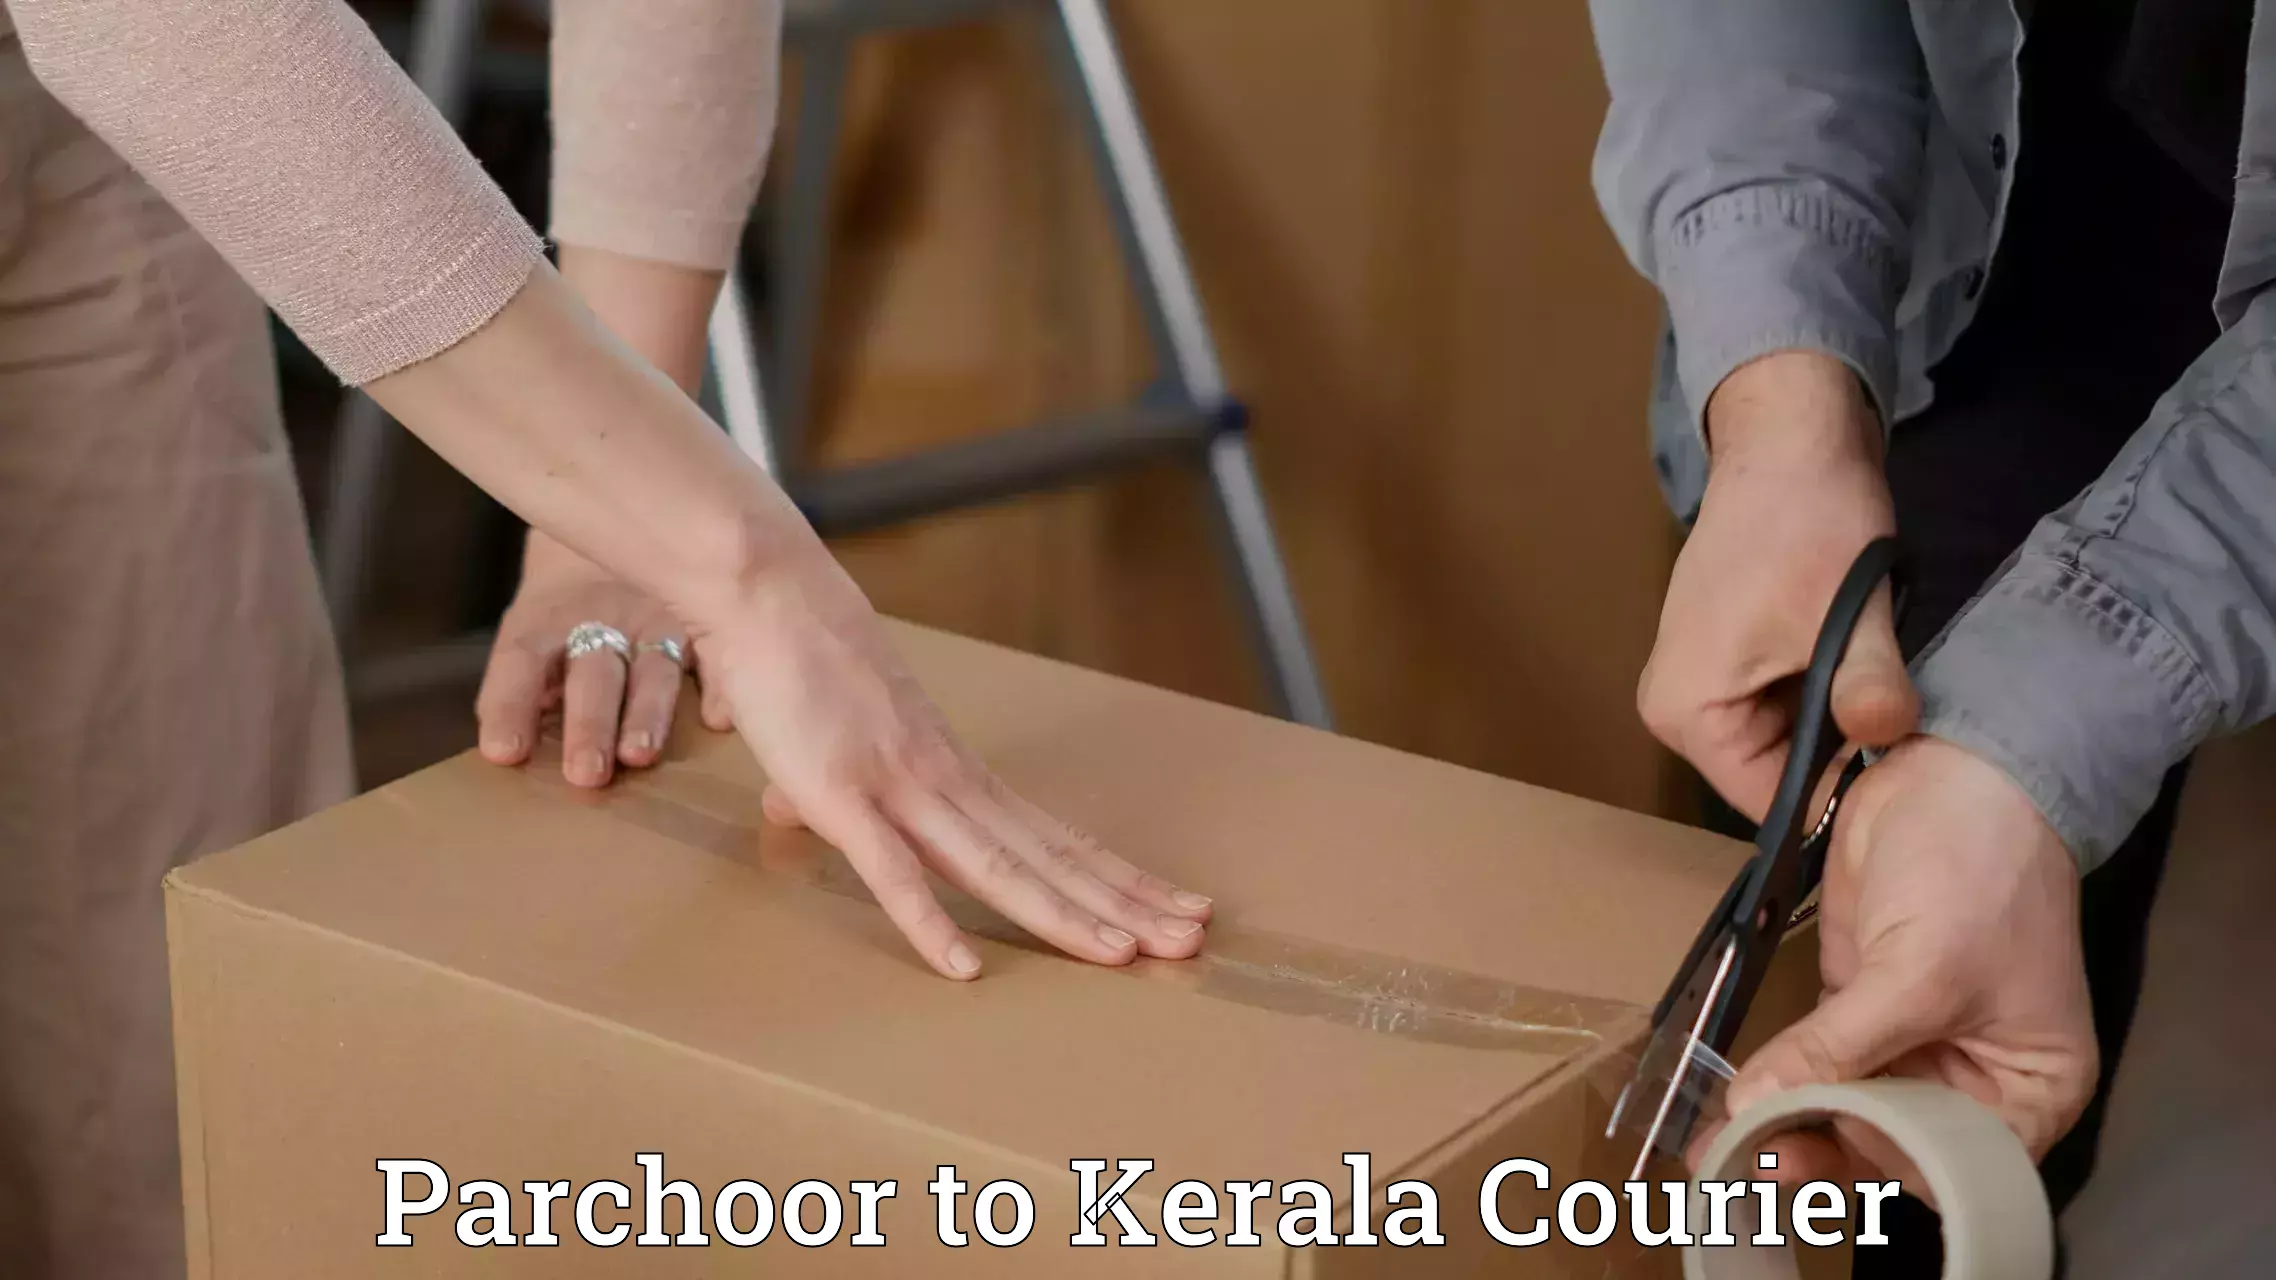 Fast delivery service Parchoor to Kerala